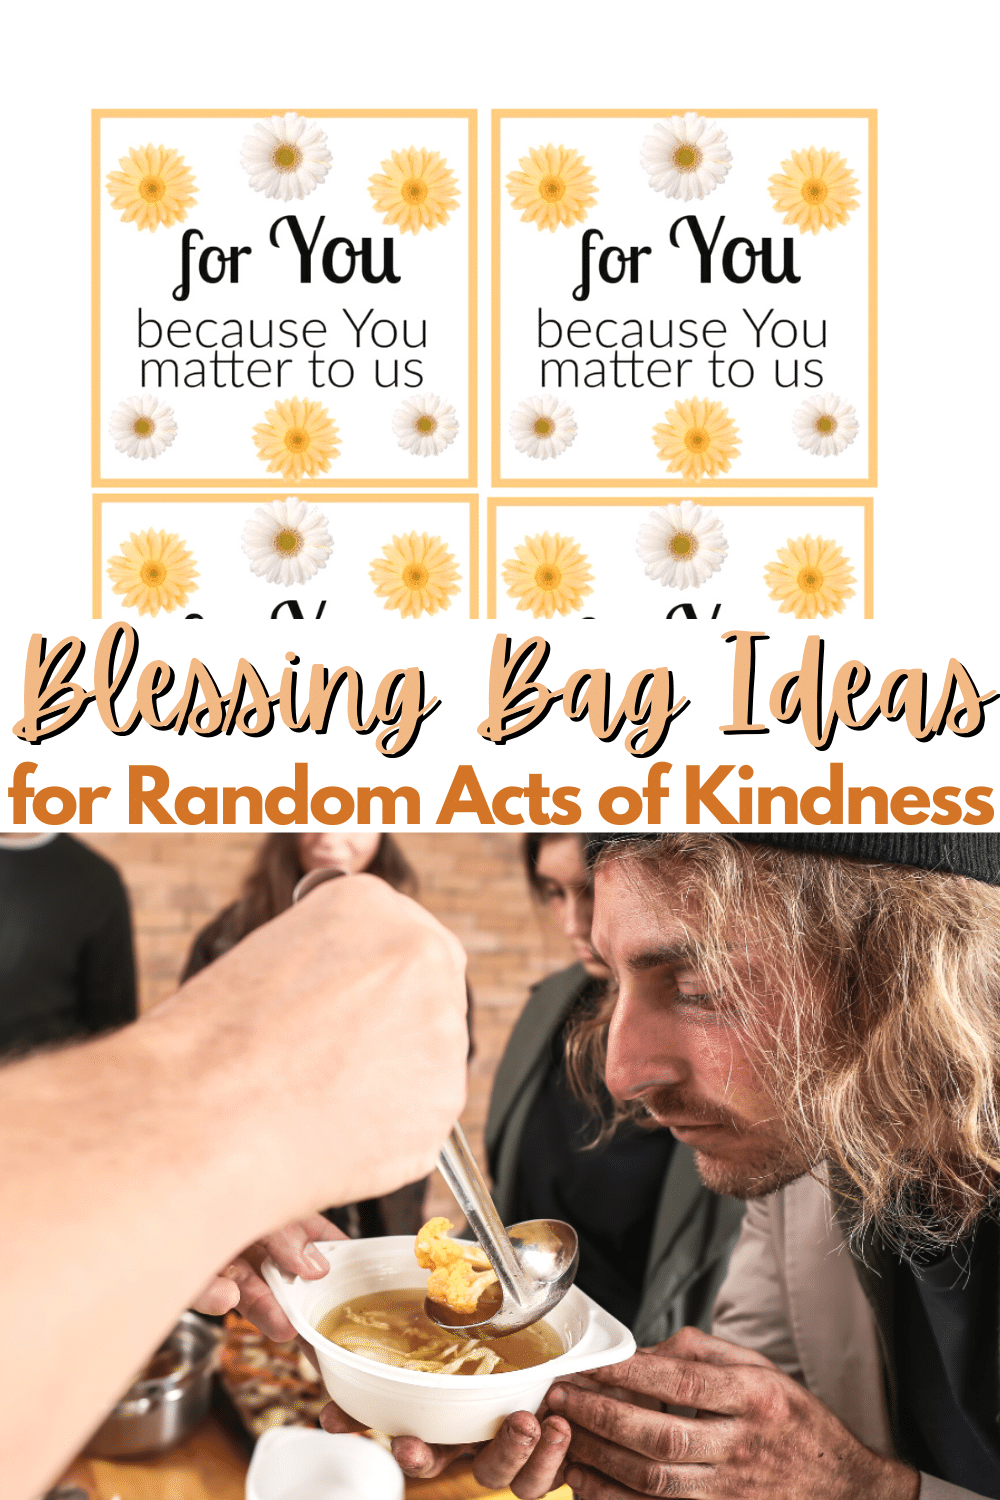 Making care packages using these simple blessing bag ideas is a wonderful random act of kindness idea to teach children to care for others. #randomactsofkindness #kindness #parentingtip #blessingbag via @wondermomwannab